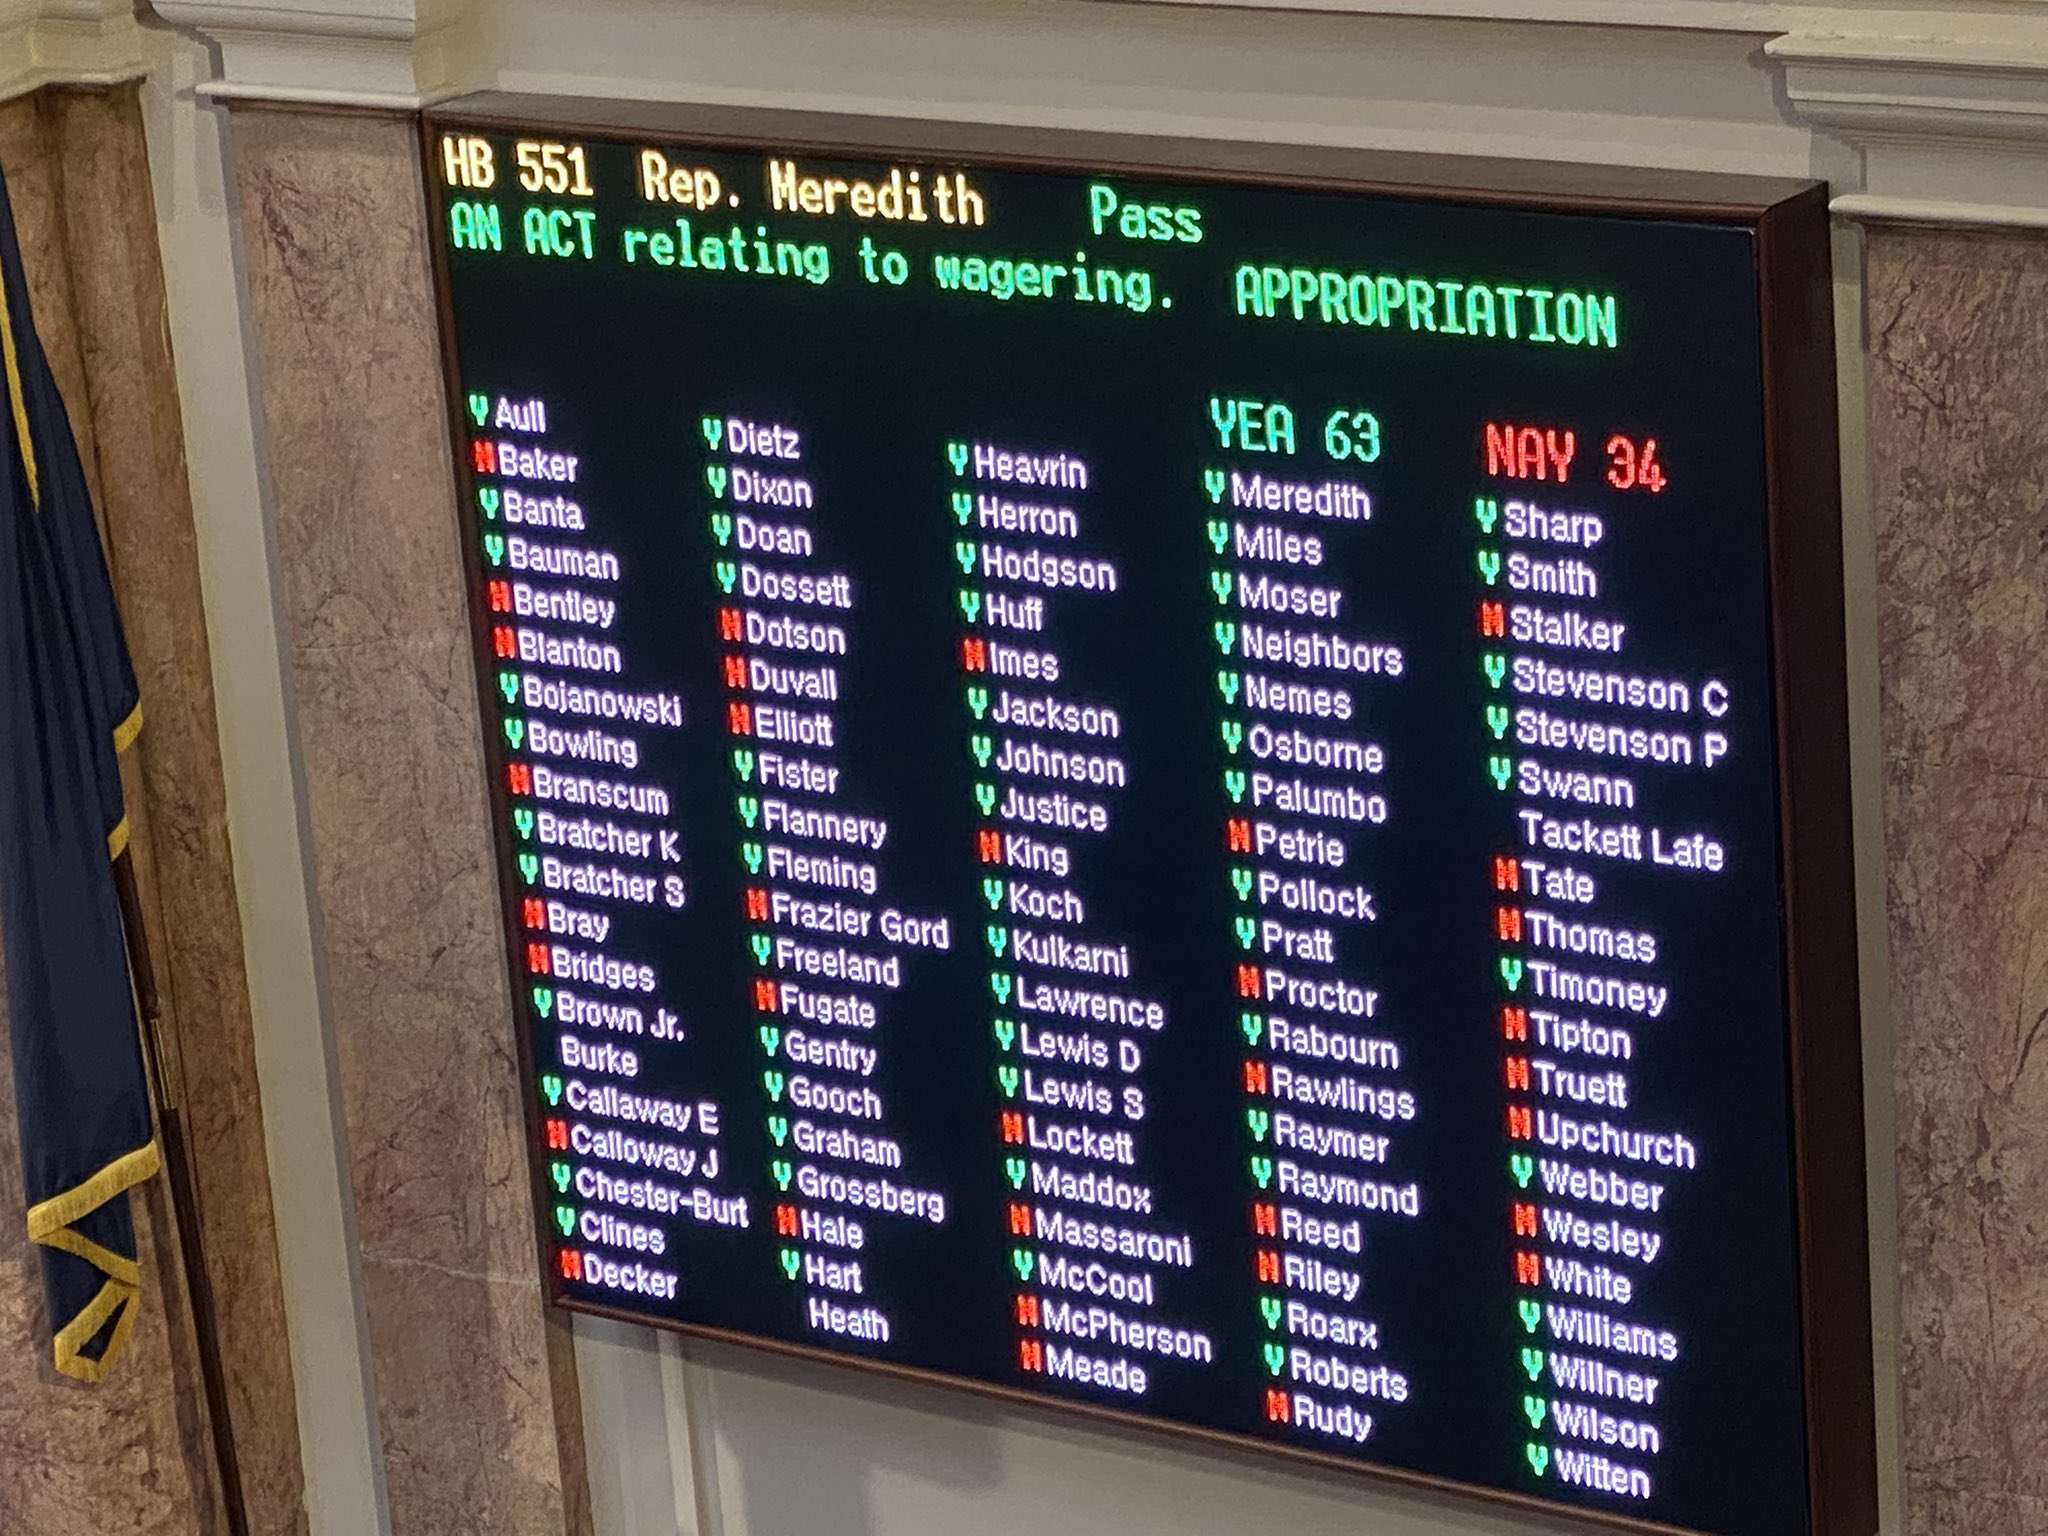 Sports Betting Bill Passes KY House, Moves on to Senate